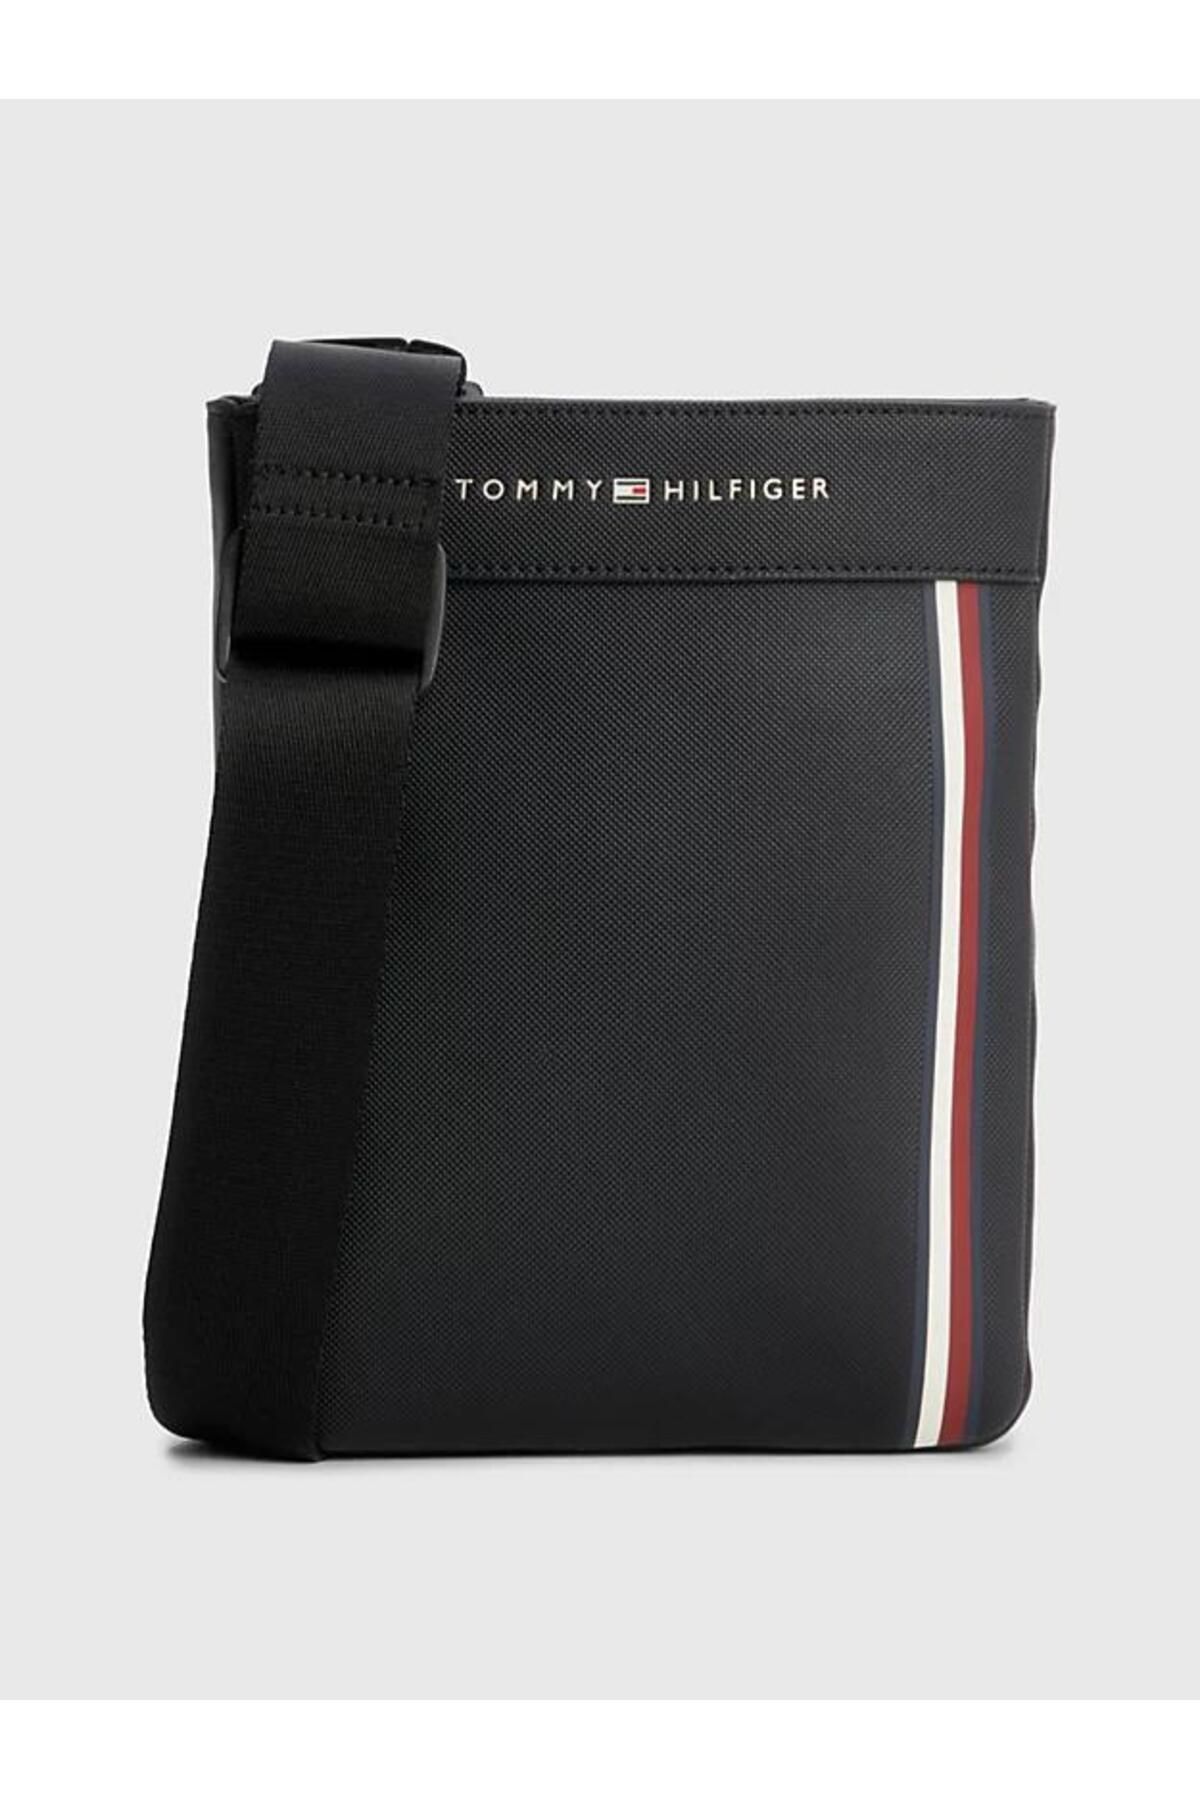 Tommy Hilfiger Th Pique Pu Mini Crossover